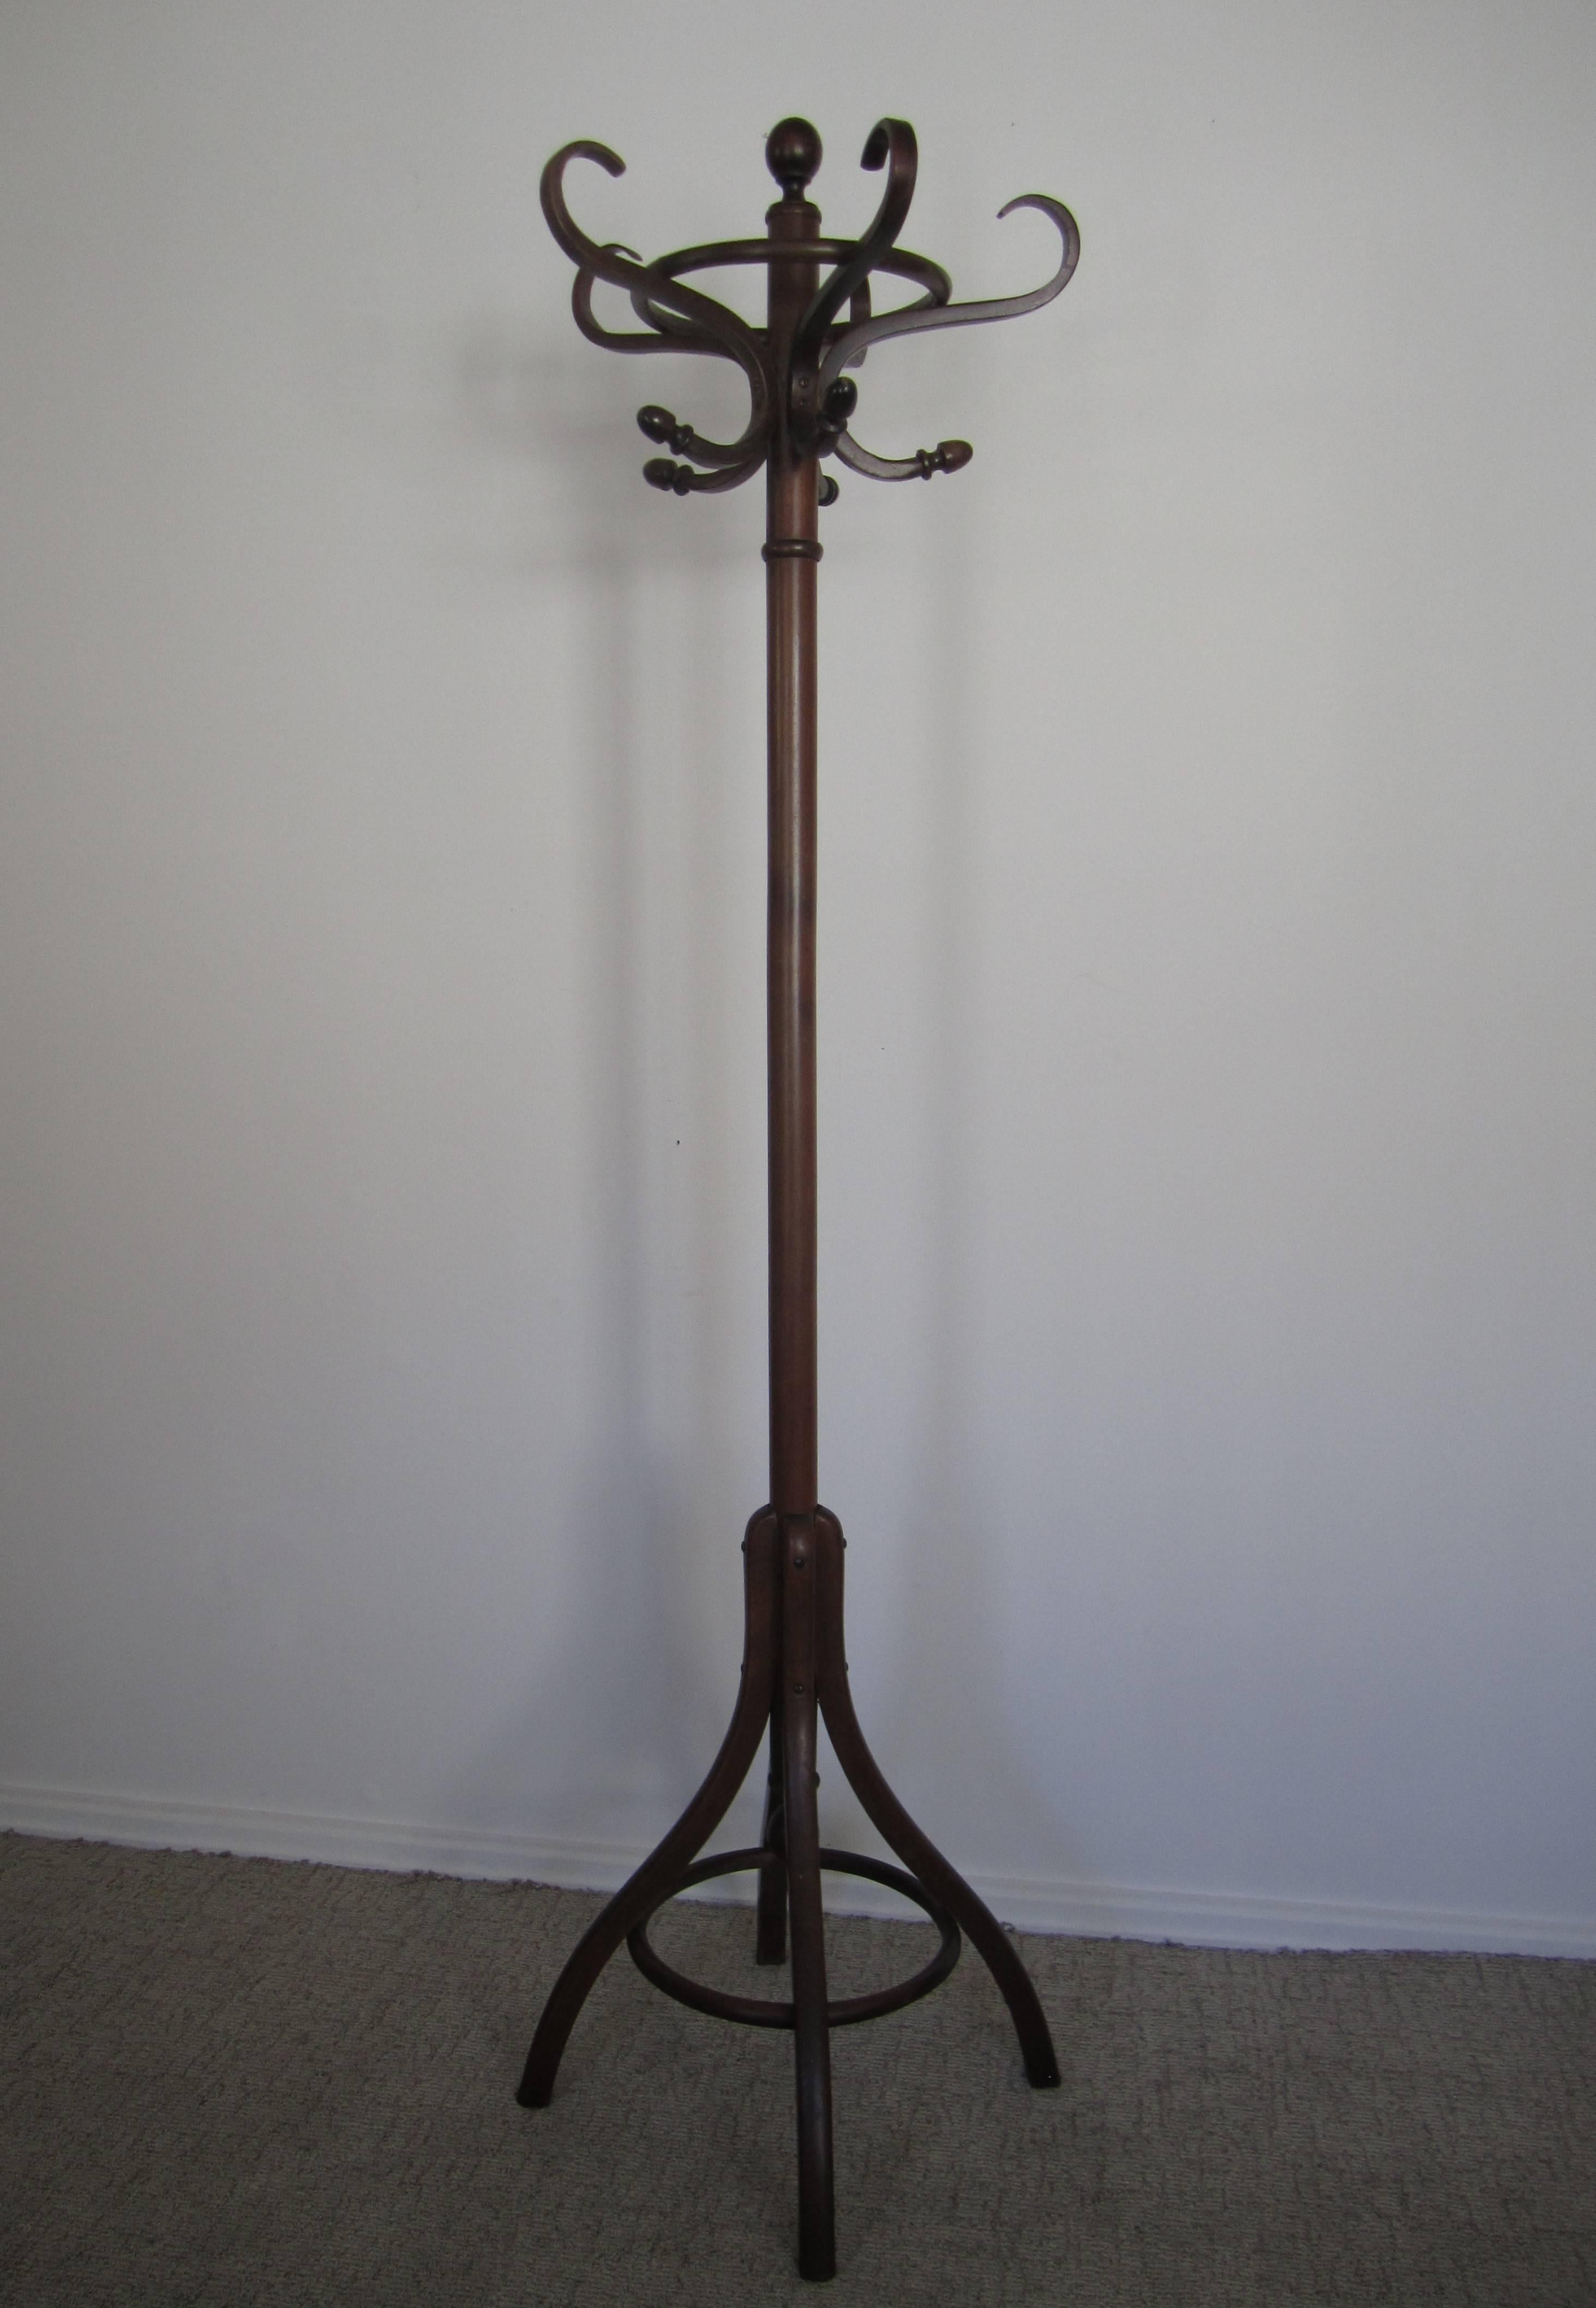 A beautiful vintage bentwood coat tree or hall rack attributed to Thonet. Coat stand has a ring base to hold umbrella's and ten 'hooks' at top. Measurements include: 6' tall. Base 15.5